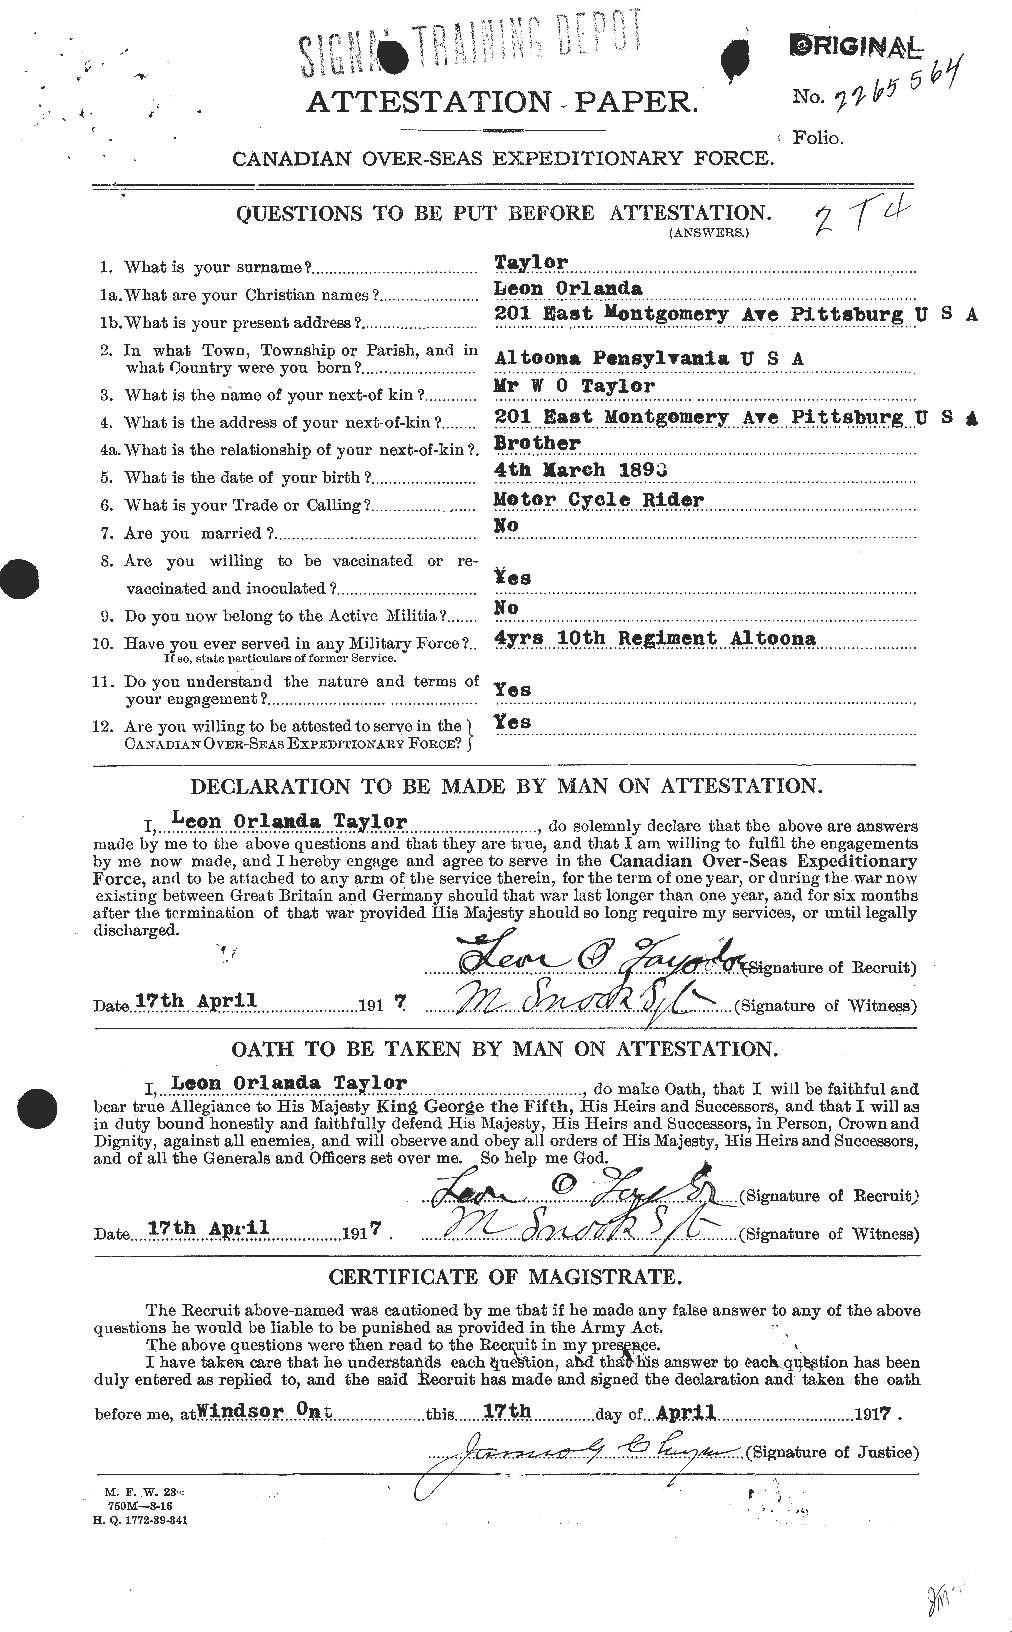 Personnel Records of the First World War - CEF 627621a